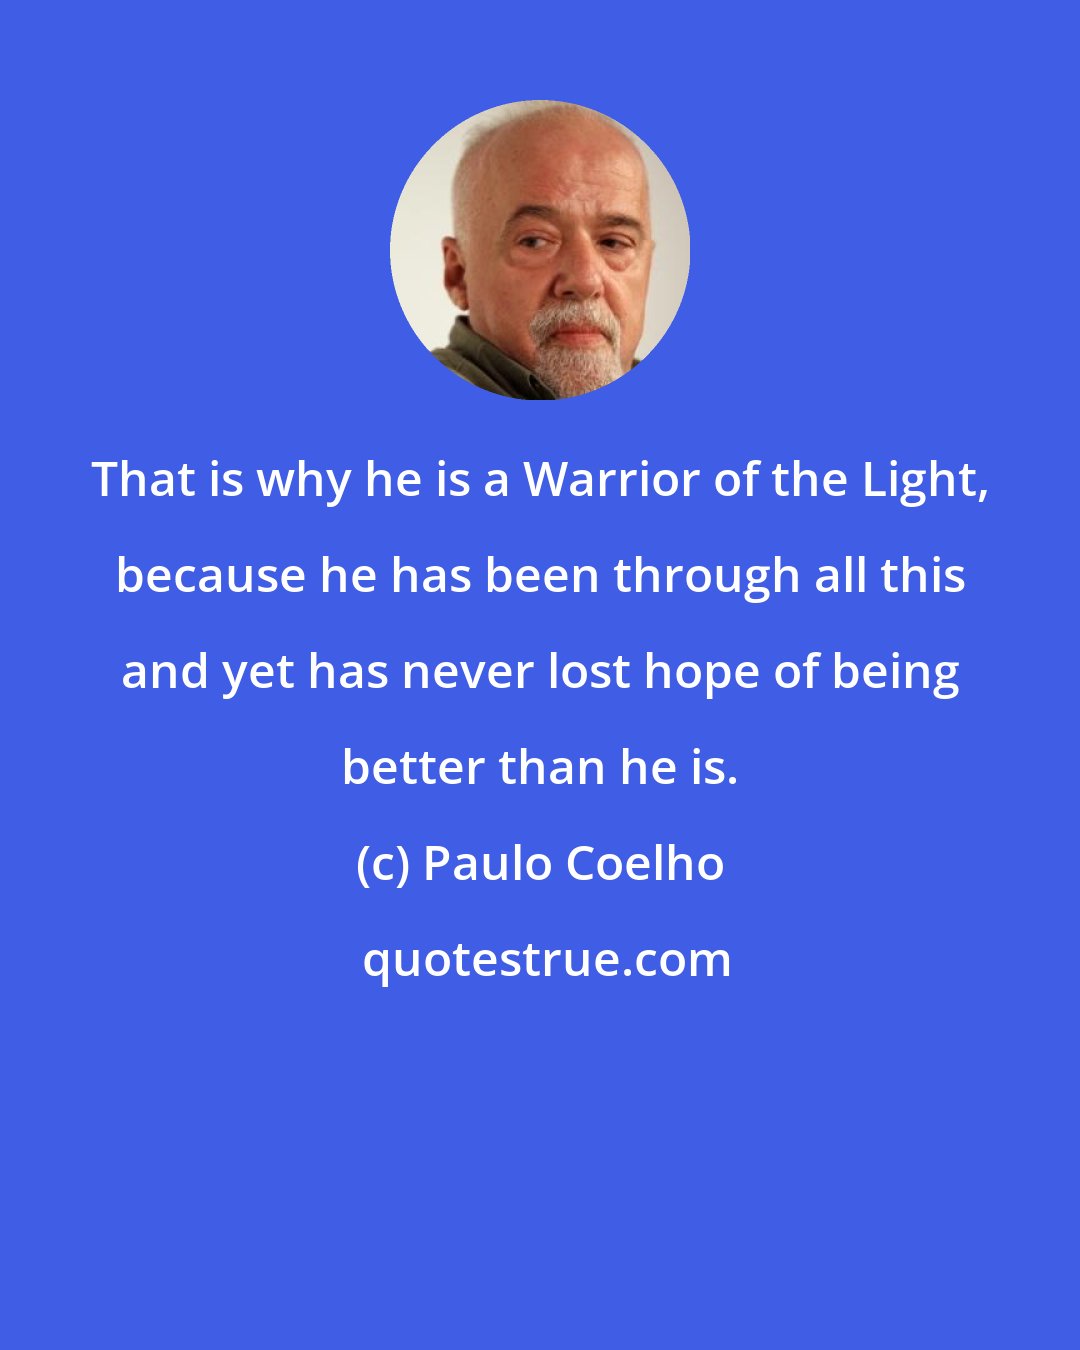 Paulo Coelho: That is why he is a Warrior of the Light, because he has been through all this and yet has never lost hope of being better than he is.